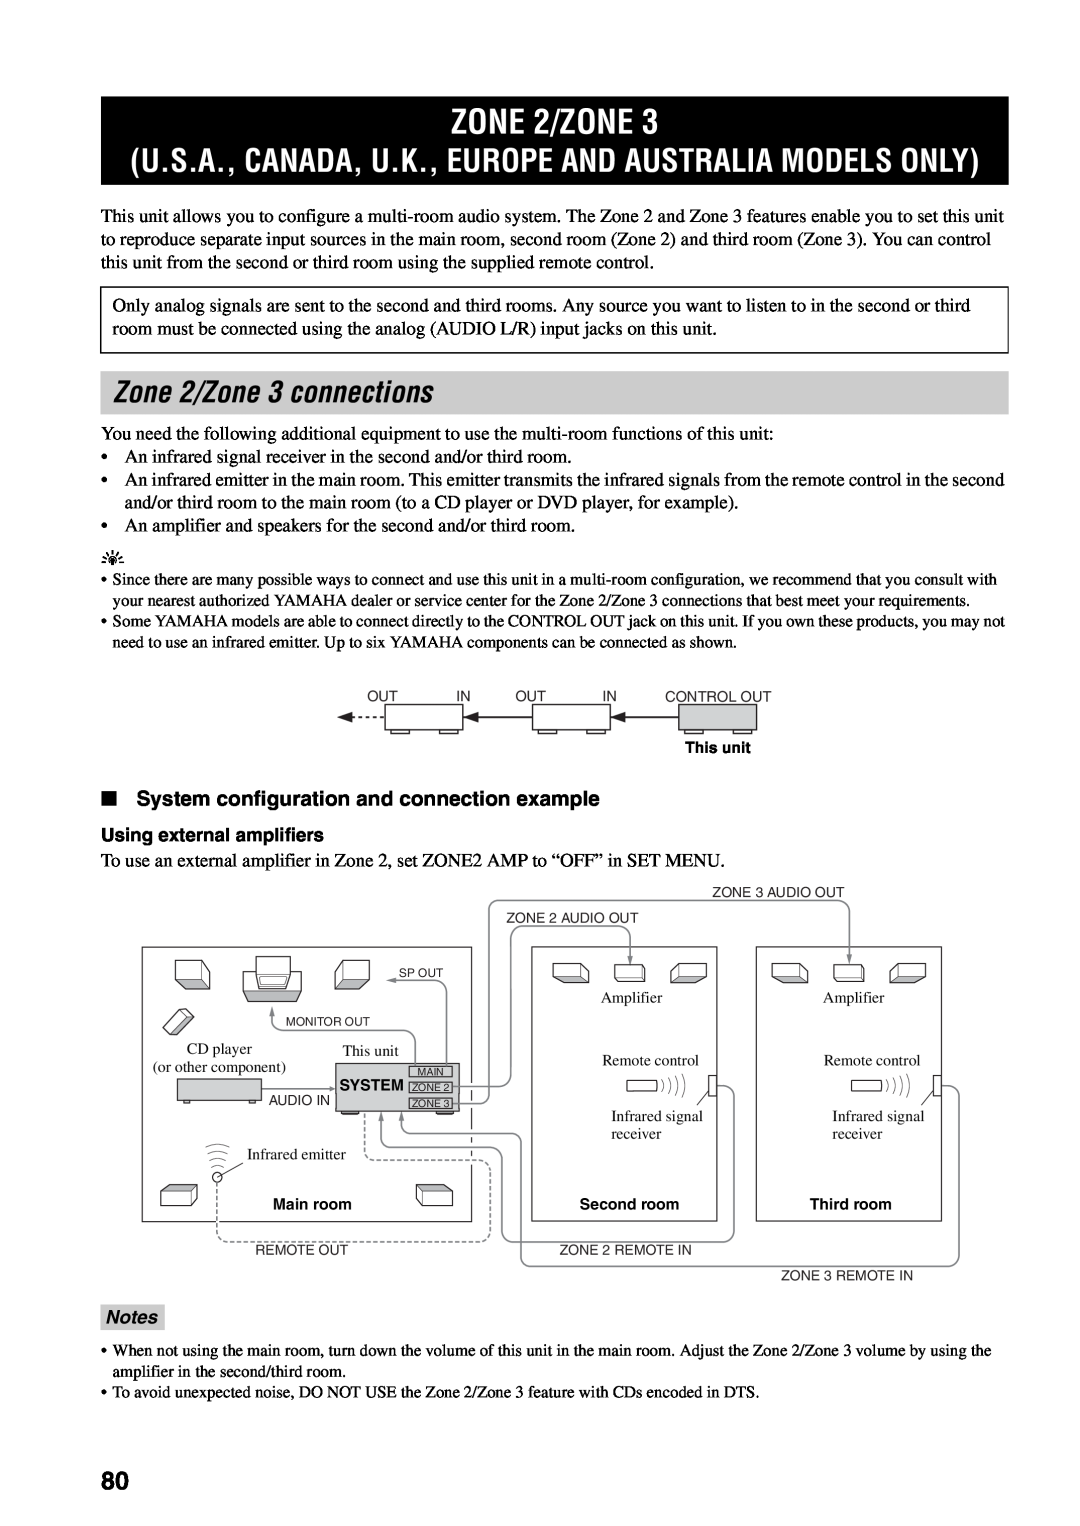 Yamaha RX-V1500 owner manual ZONE 2/ZONE, Zone 2/Zone 3 connections, System configuration and connection example, Notes 